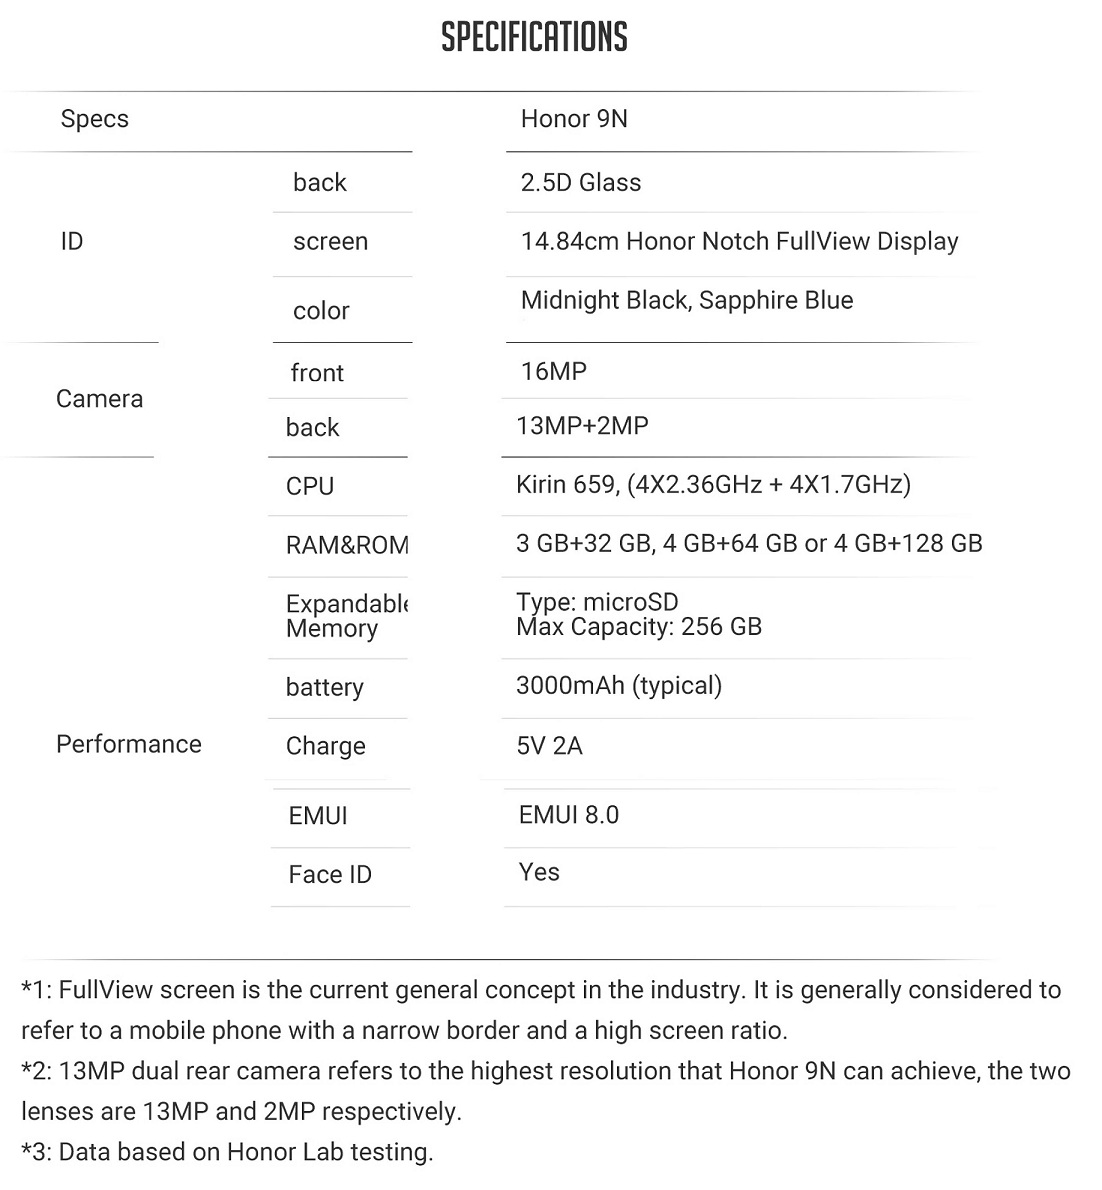 Honor 9N’s Intrigue Specification